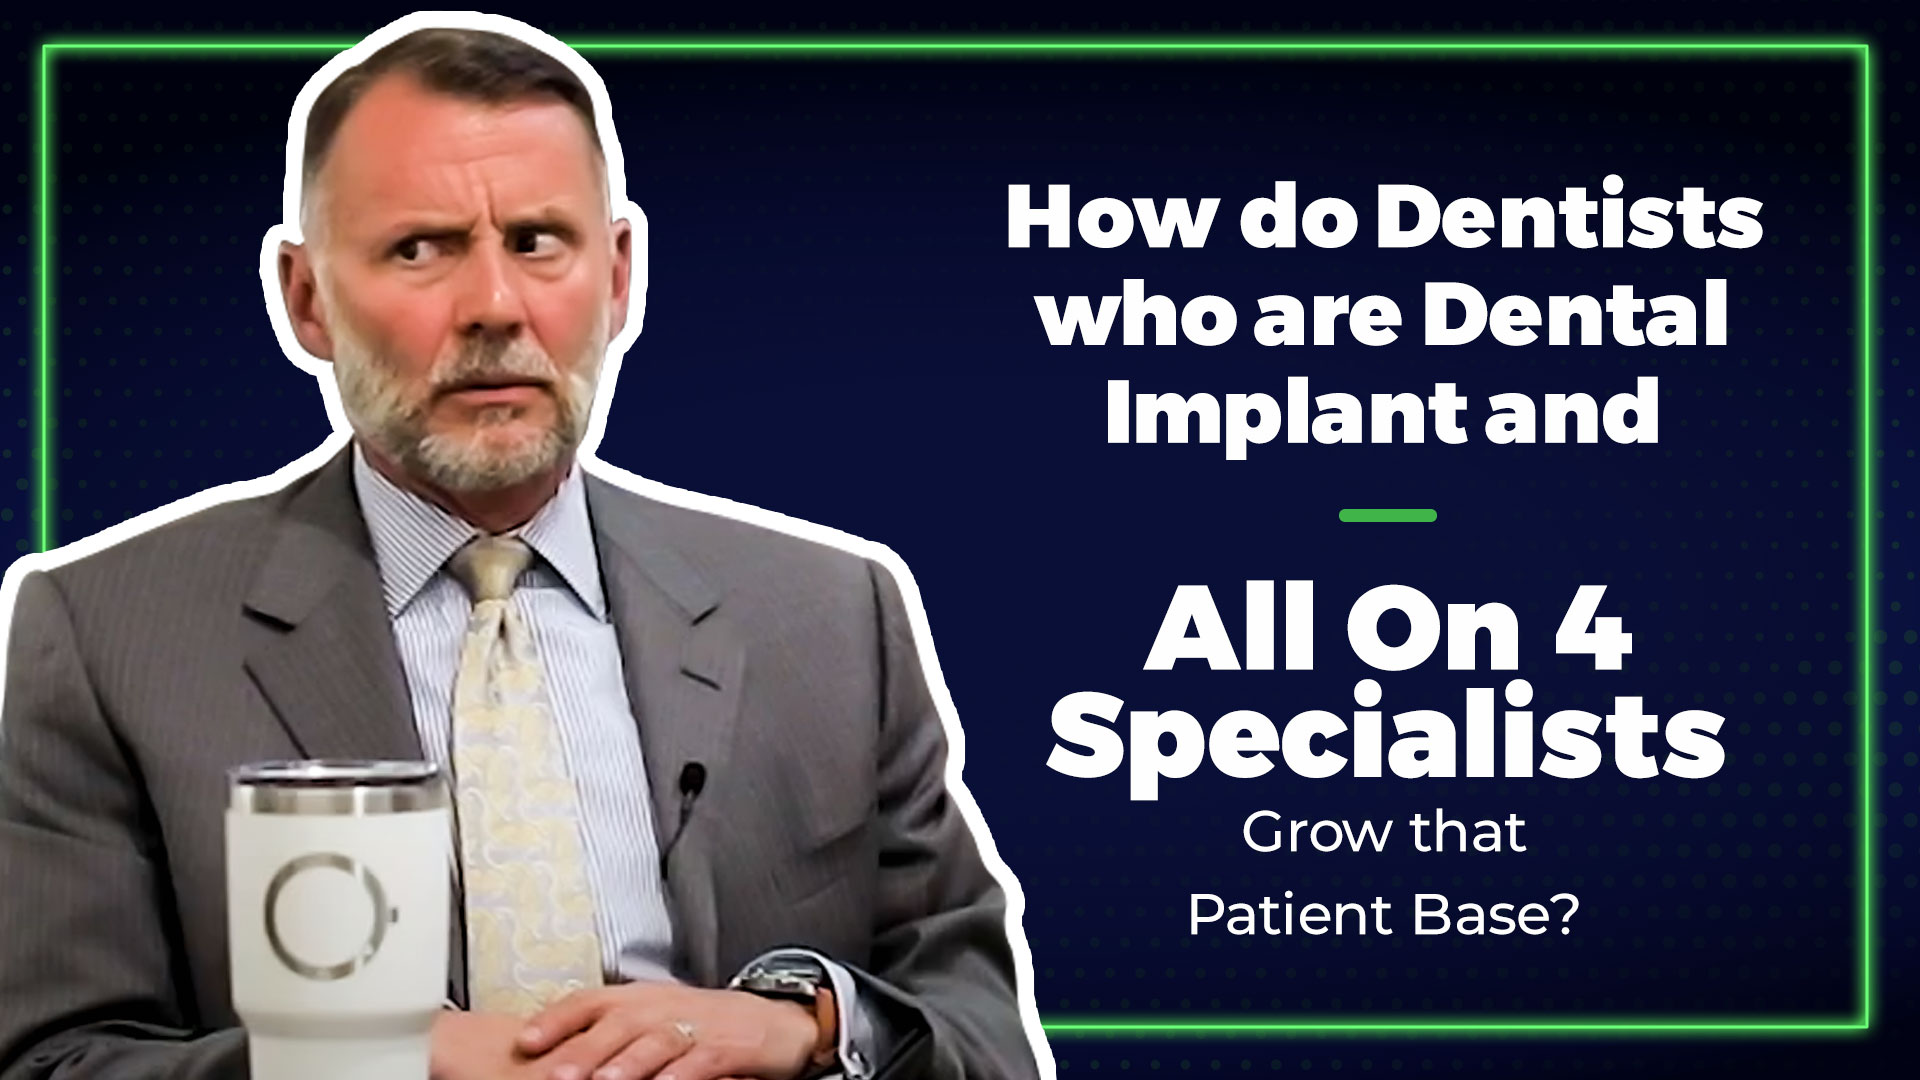 A Word to the Wise | How do Dentists who are Dental Implant and All-On-4 Specialists